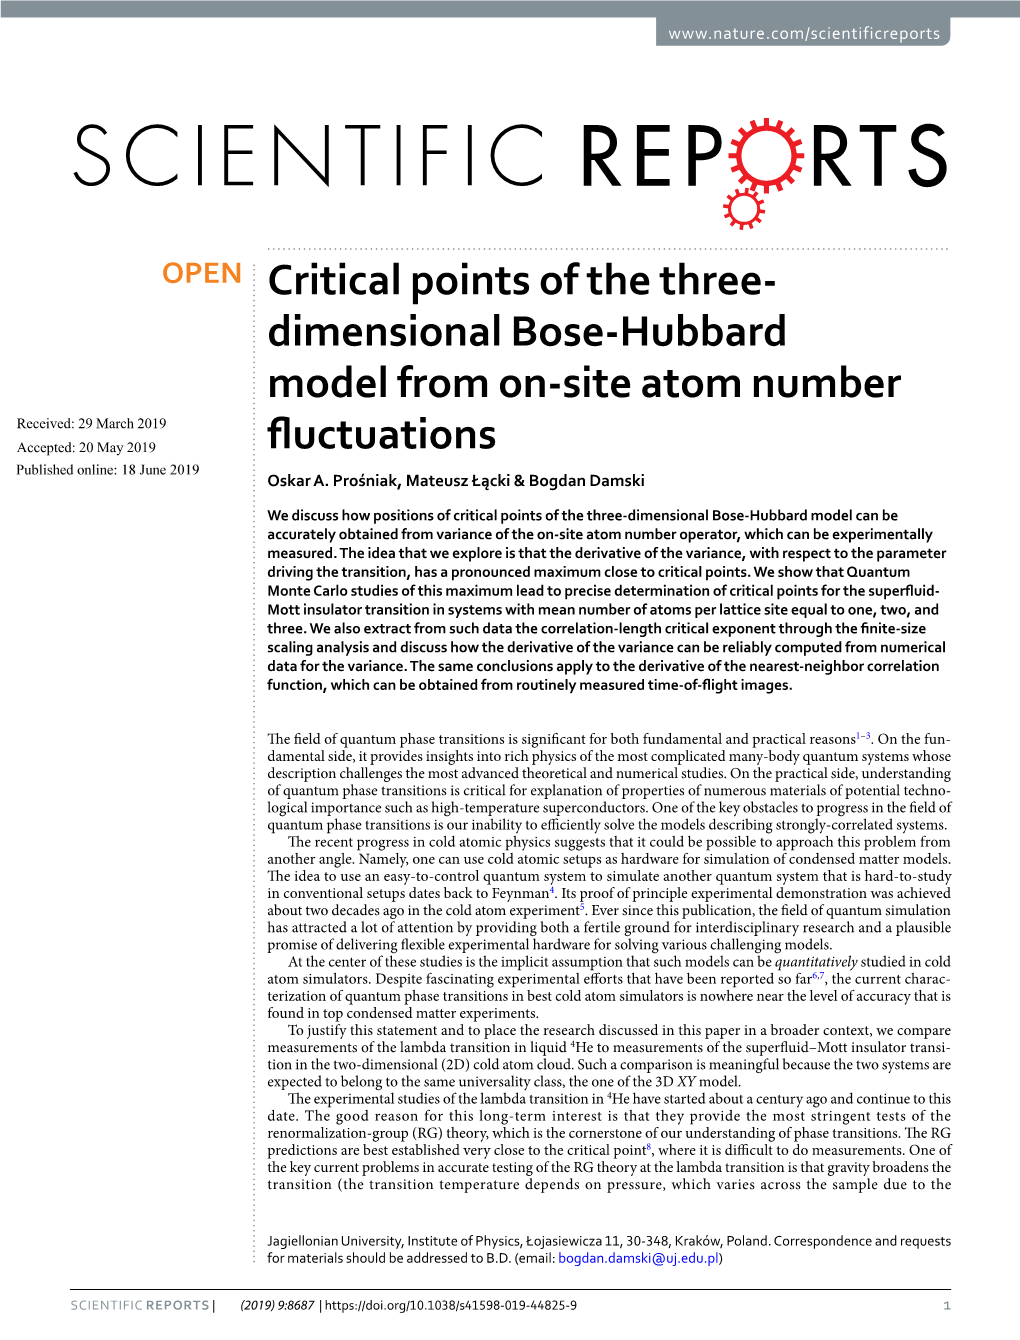 Dimensional Bose-Hubbard Model from On-Site Atom Number Fluctuations